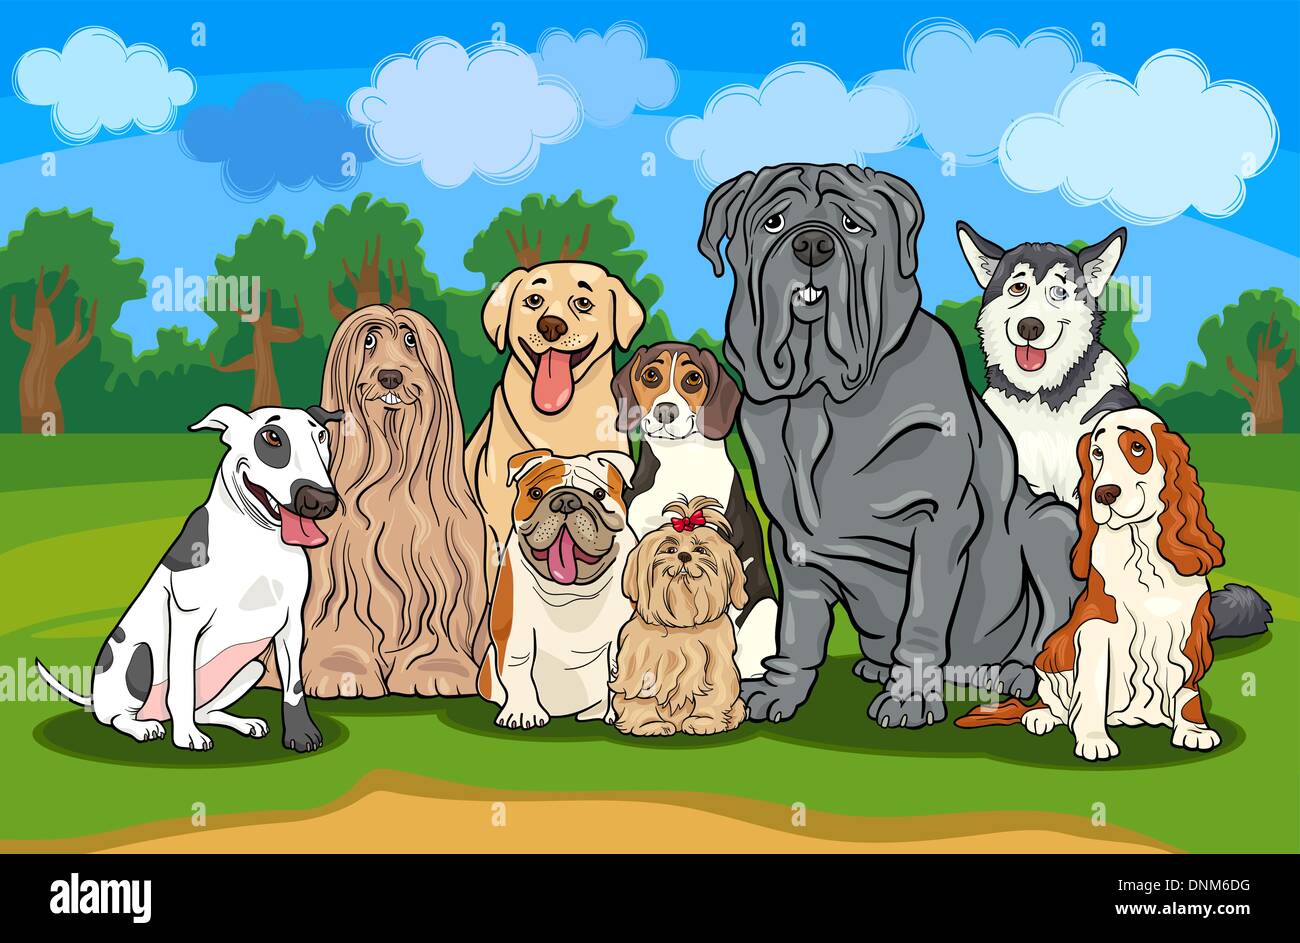 Cartoon Illustration of Funny Purebred Dogs or Puppies Group against Rural Landscape with Blue Sky Stock Vector